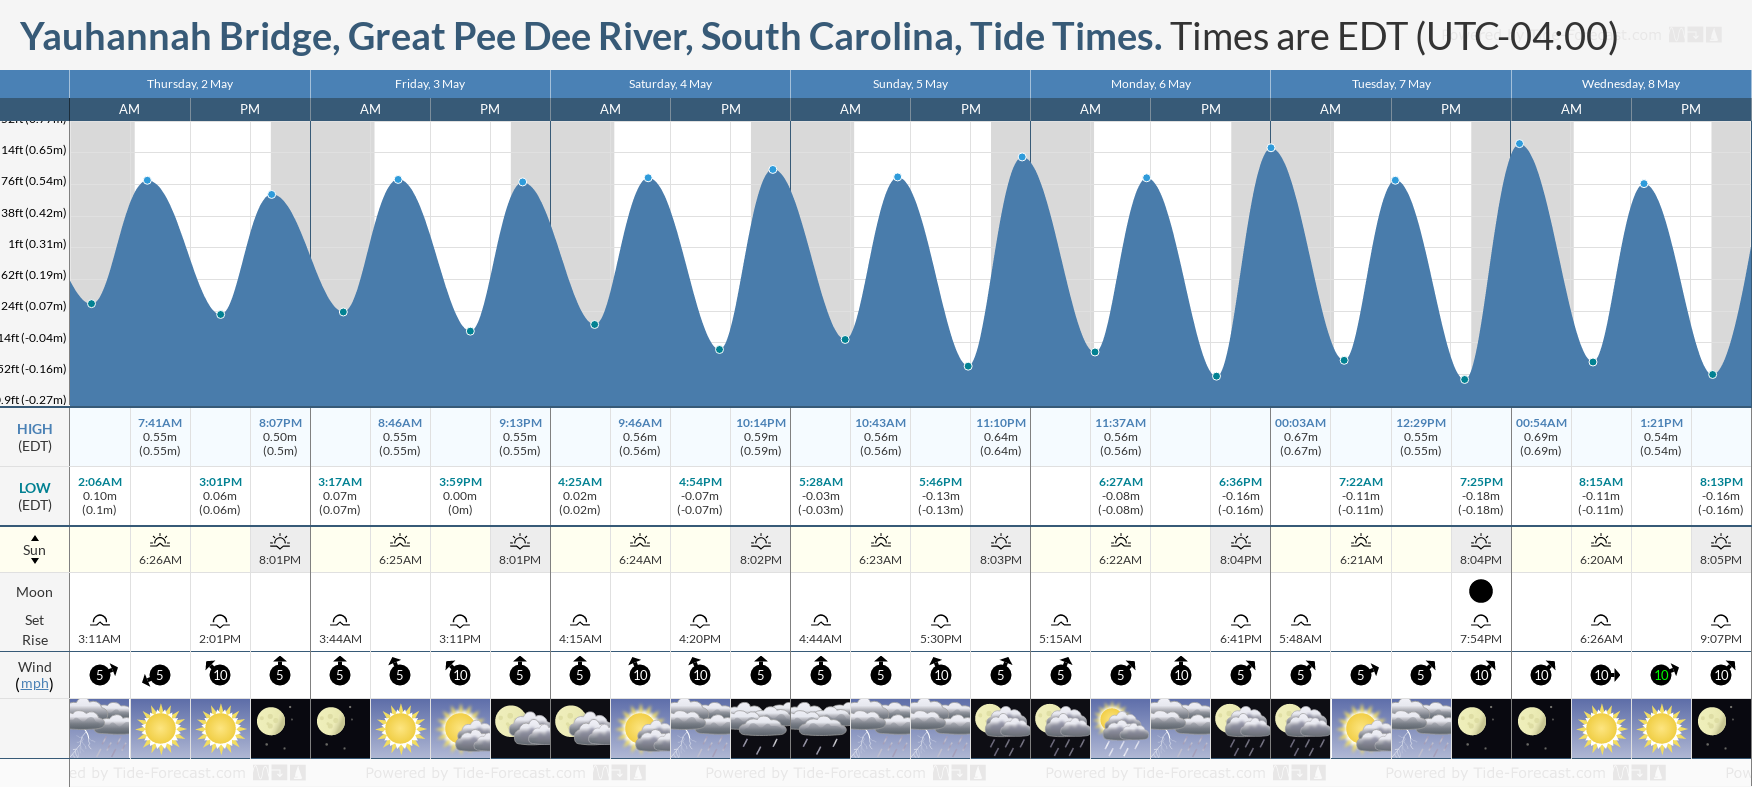 Yauhannah Bridge, Great Pee Dee River, South Carolina Tide Chart including high and low tide tide times for the next 7 days